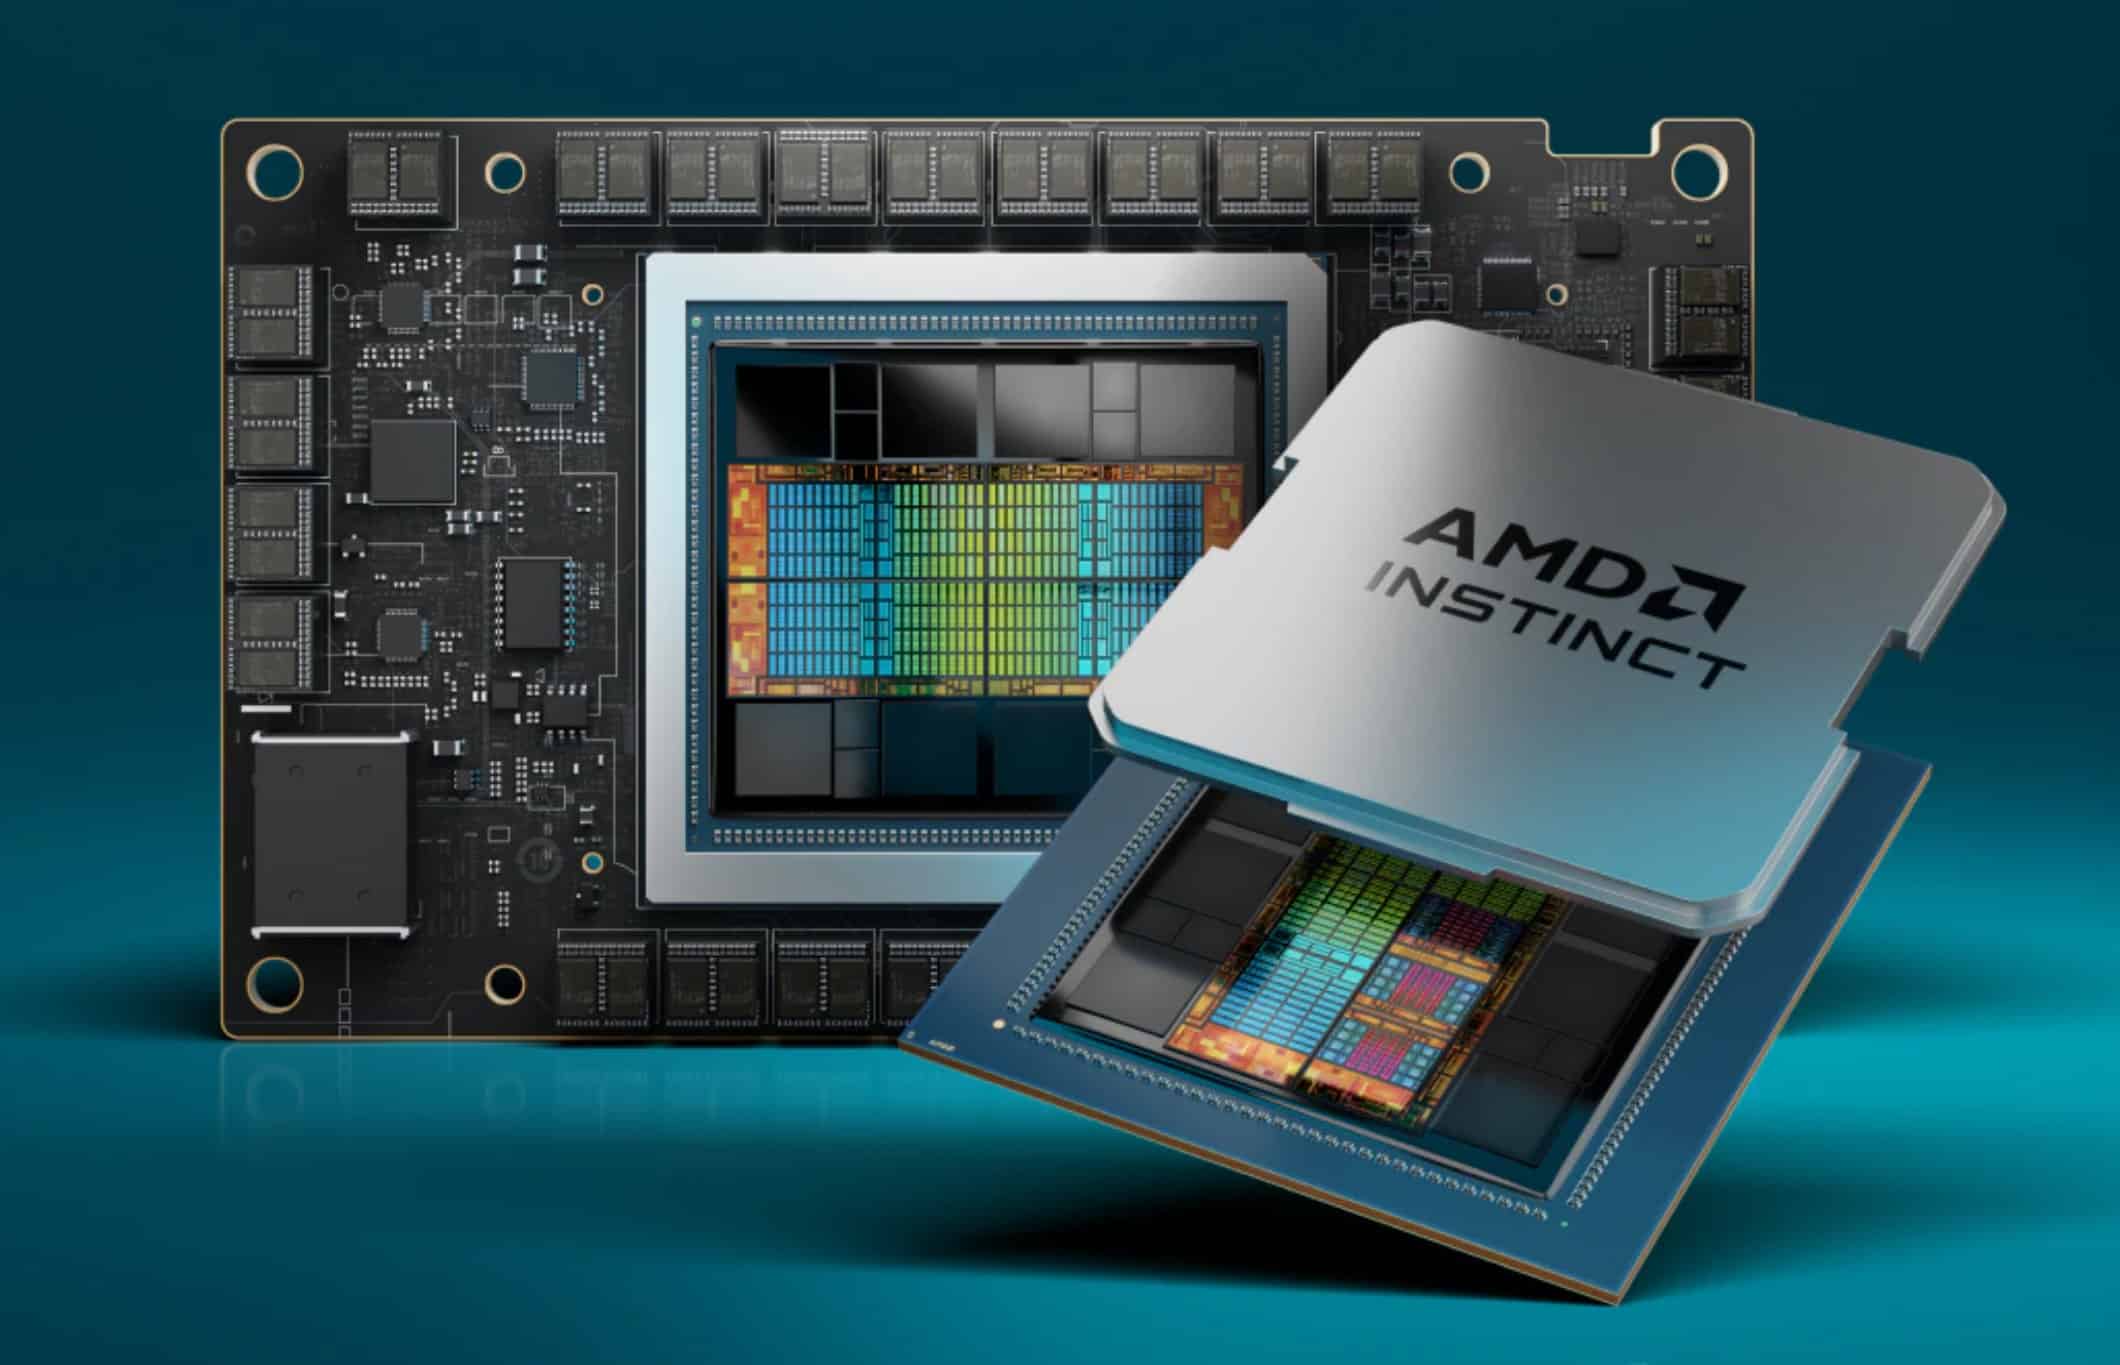 AMD unveils new AI accelerators and APU for cloud and enterprise